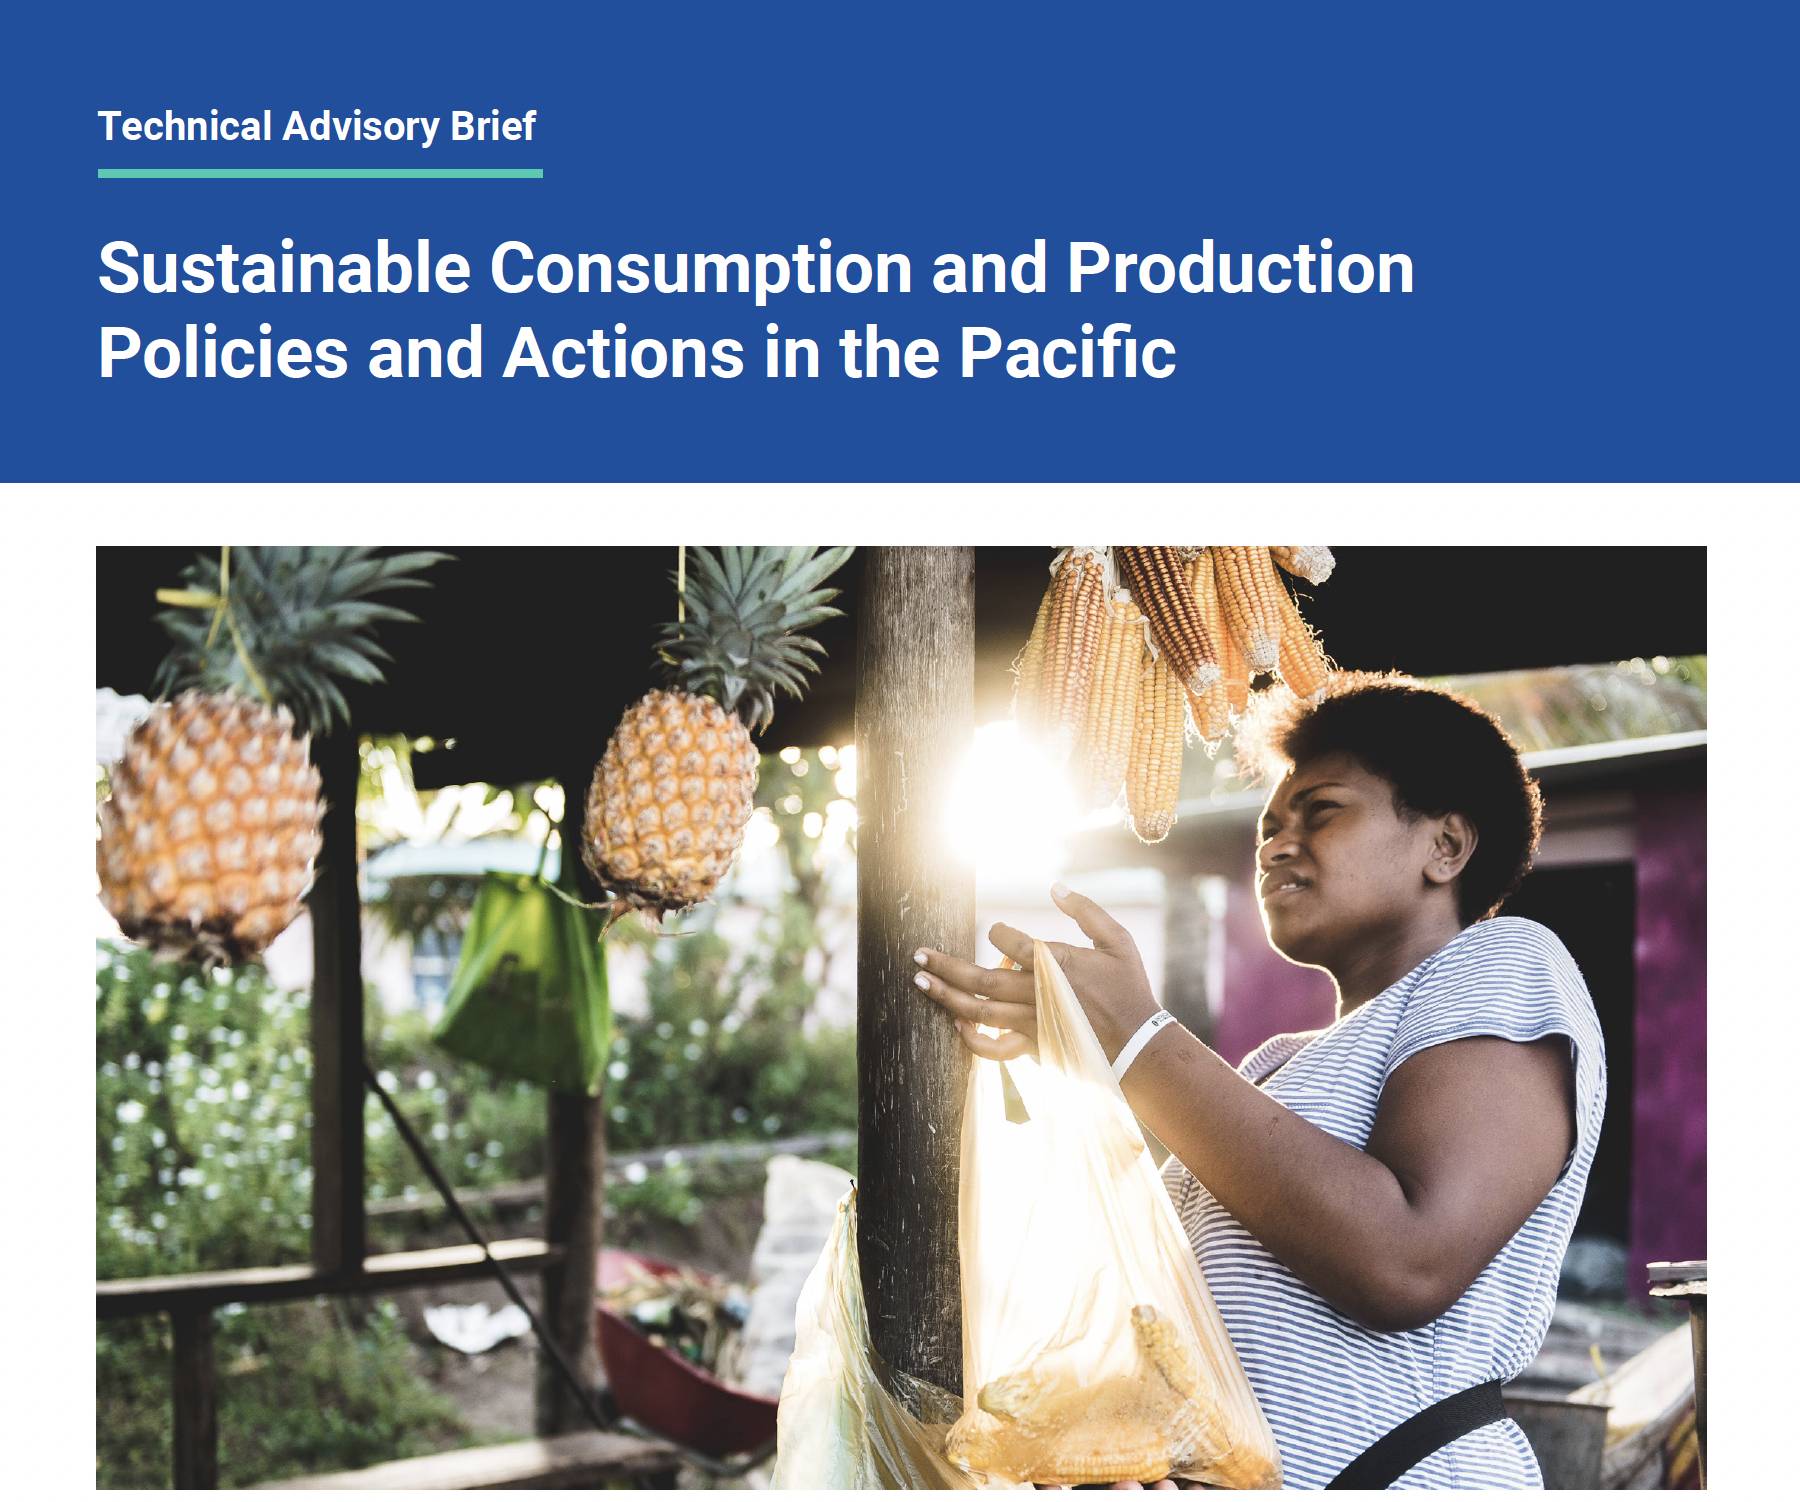 Sustainable Consumption and Production Policies and Actions in the Pacific